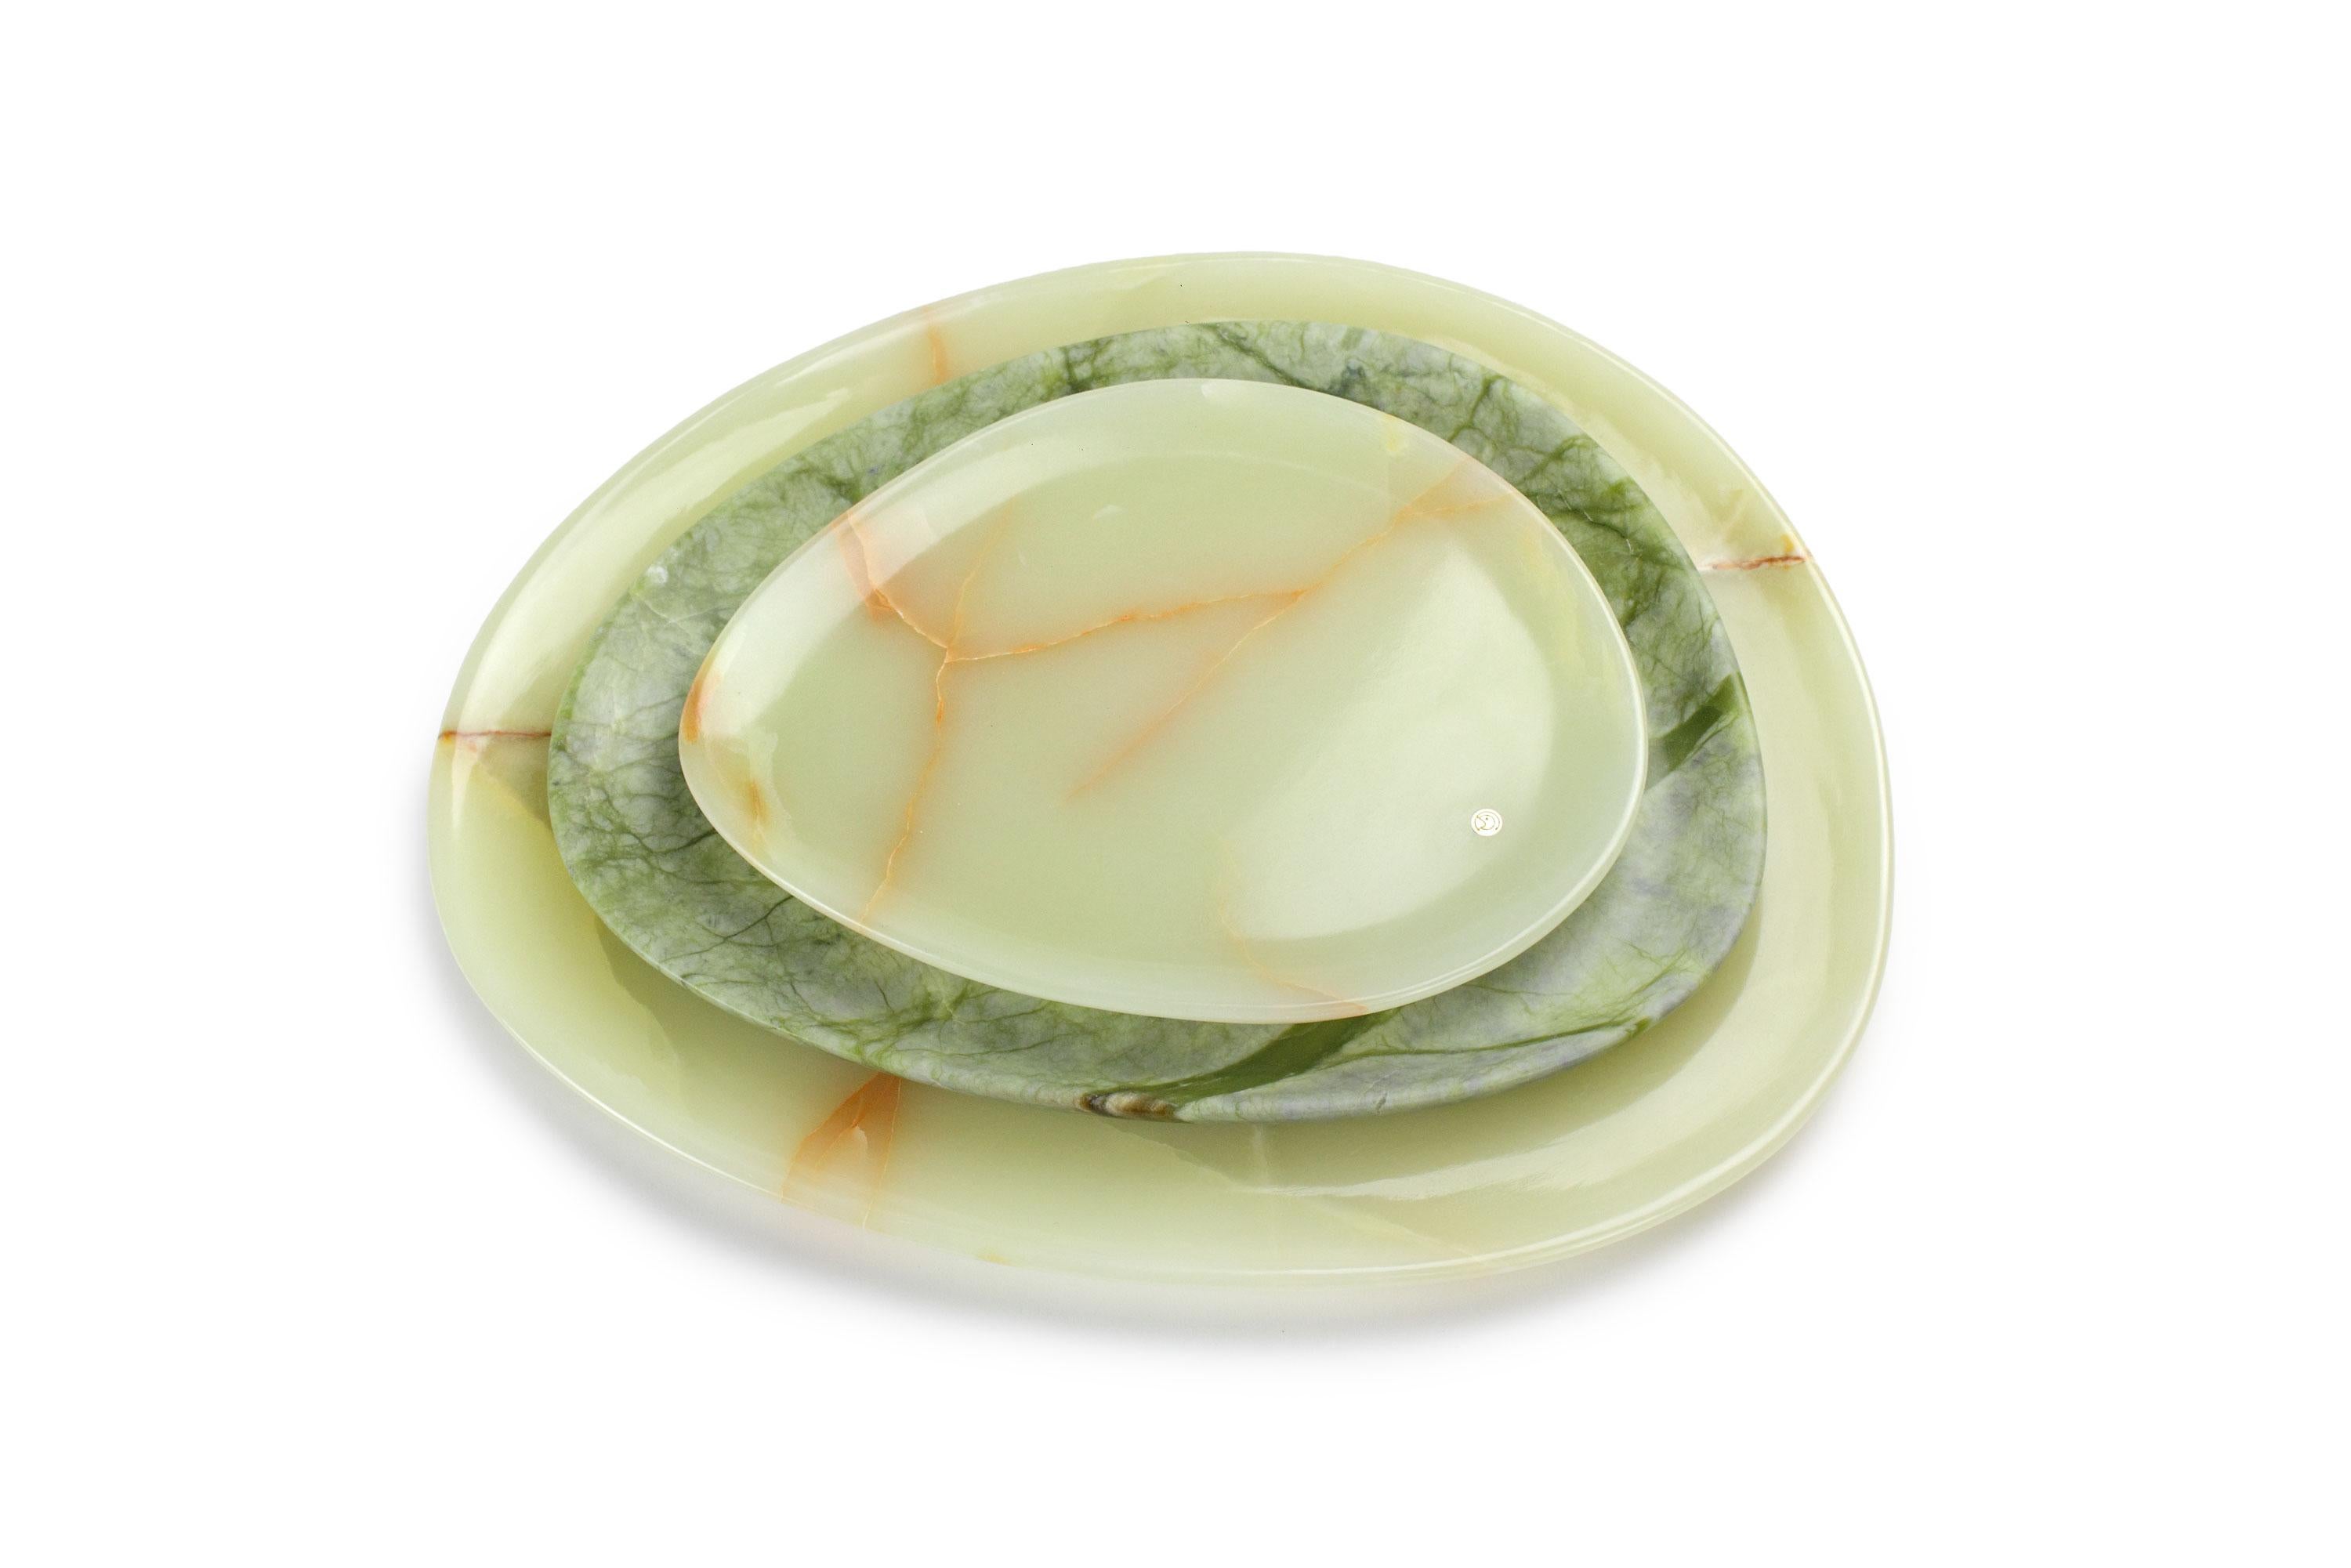 Hand carved presentation plates in green onyx (orange shadows) and Green Ming. 
Multiple use as plates, platters and placers. 

Dimensions: Small - L 24 W 20 H 1.8 cm, Medium - L 30 W 28 H 1.8 cm, Big - L 36 W 35 H 1.8 cm.
Available in different